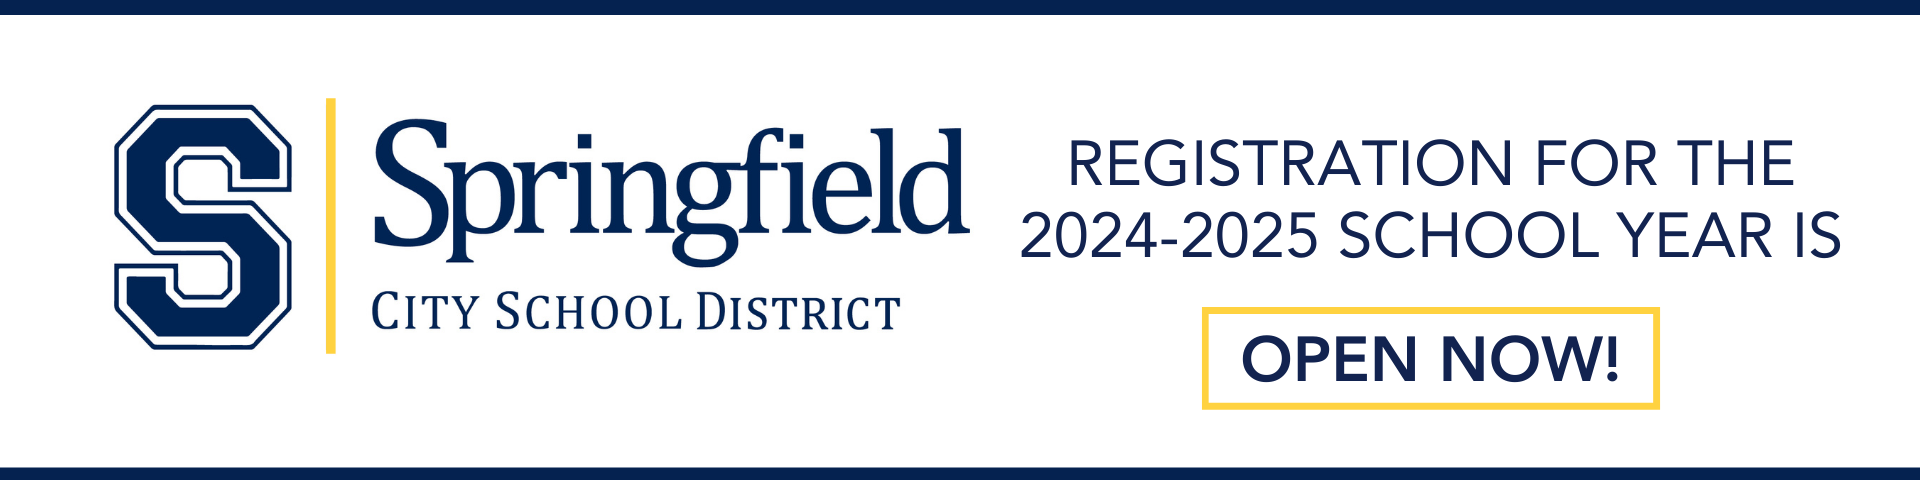 Registration for the 2024-2025 school year is open now!